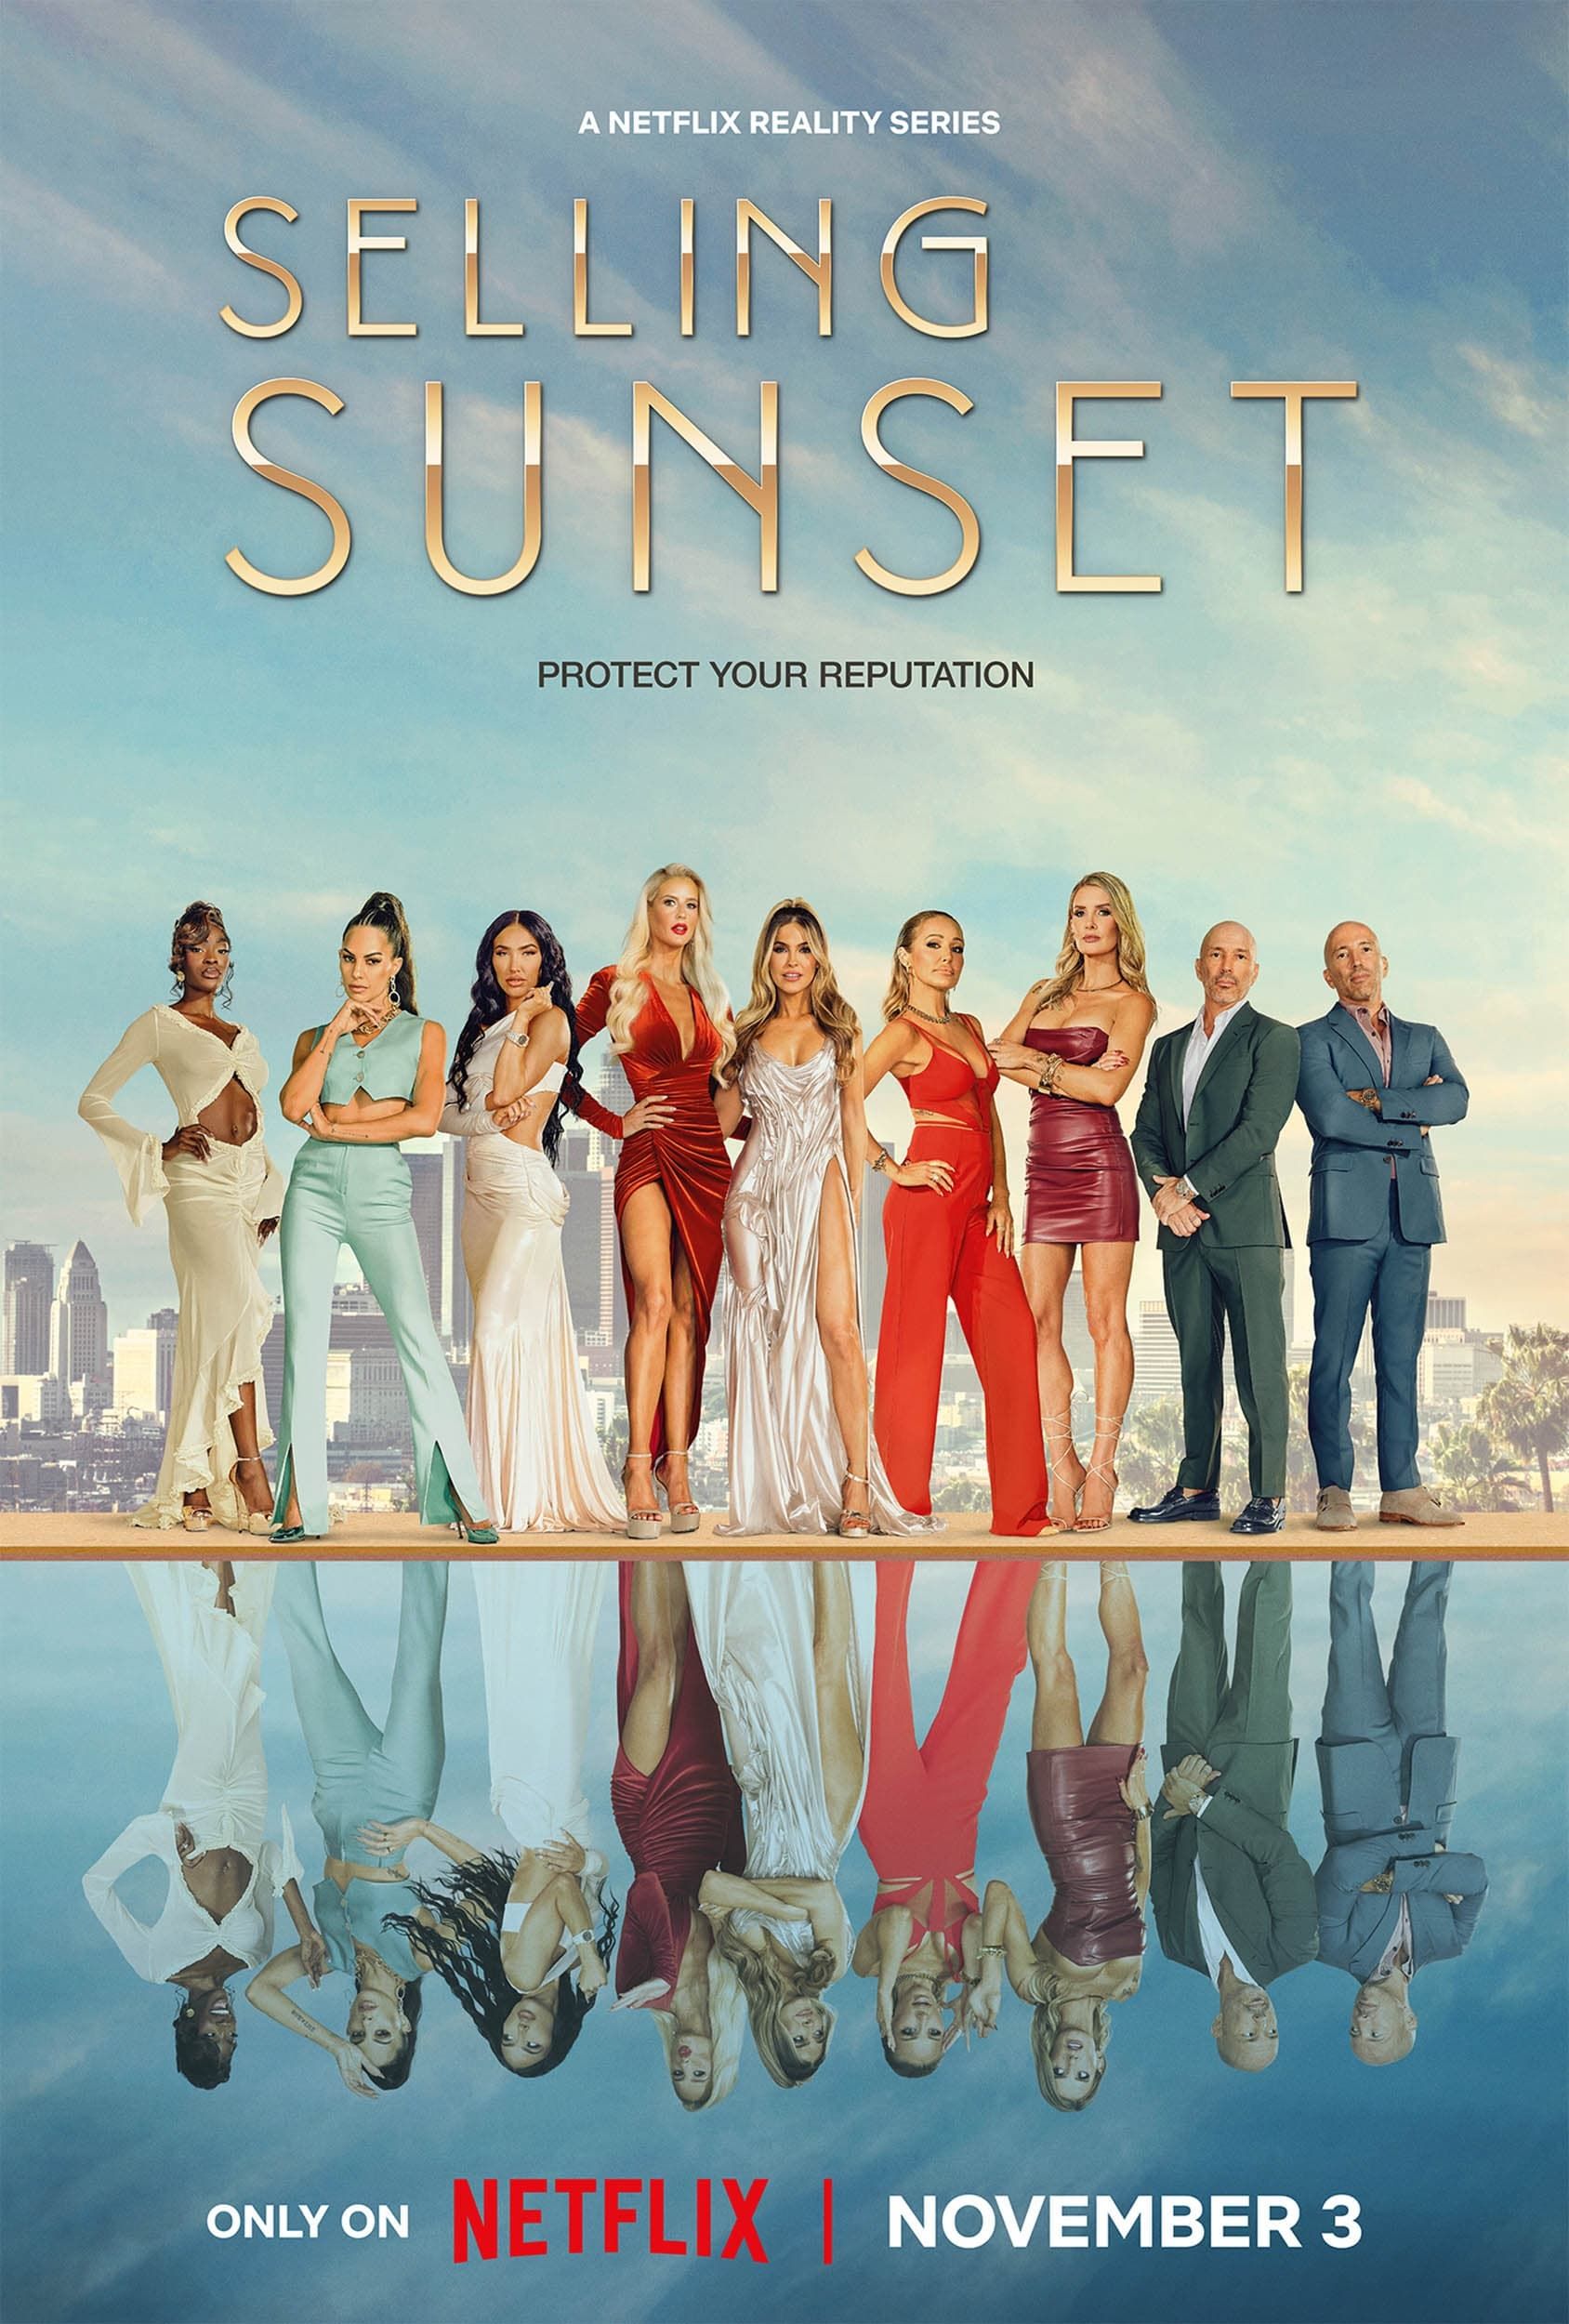 Selling sunset TV Show Poster